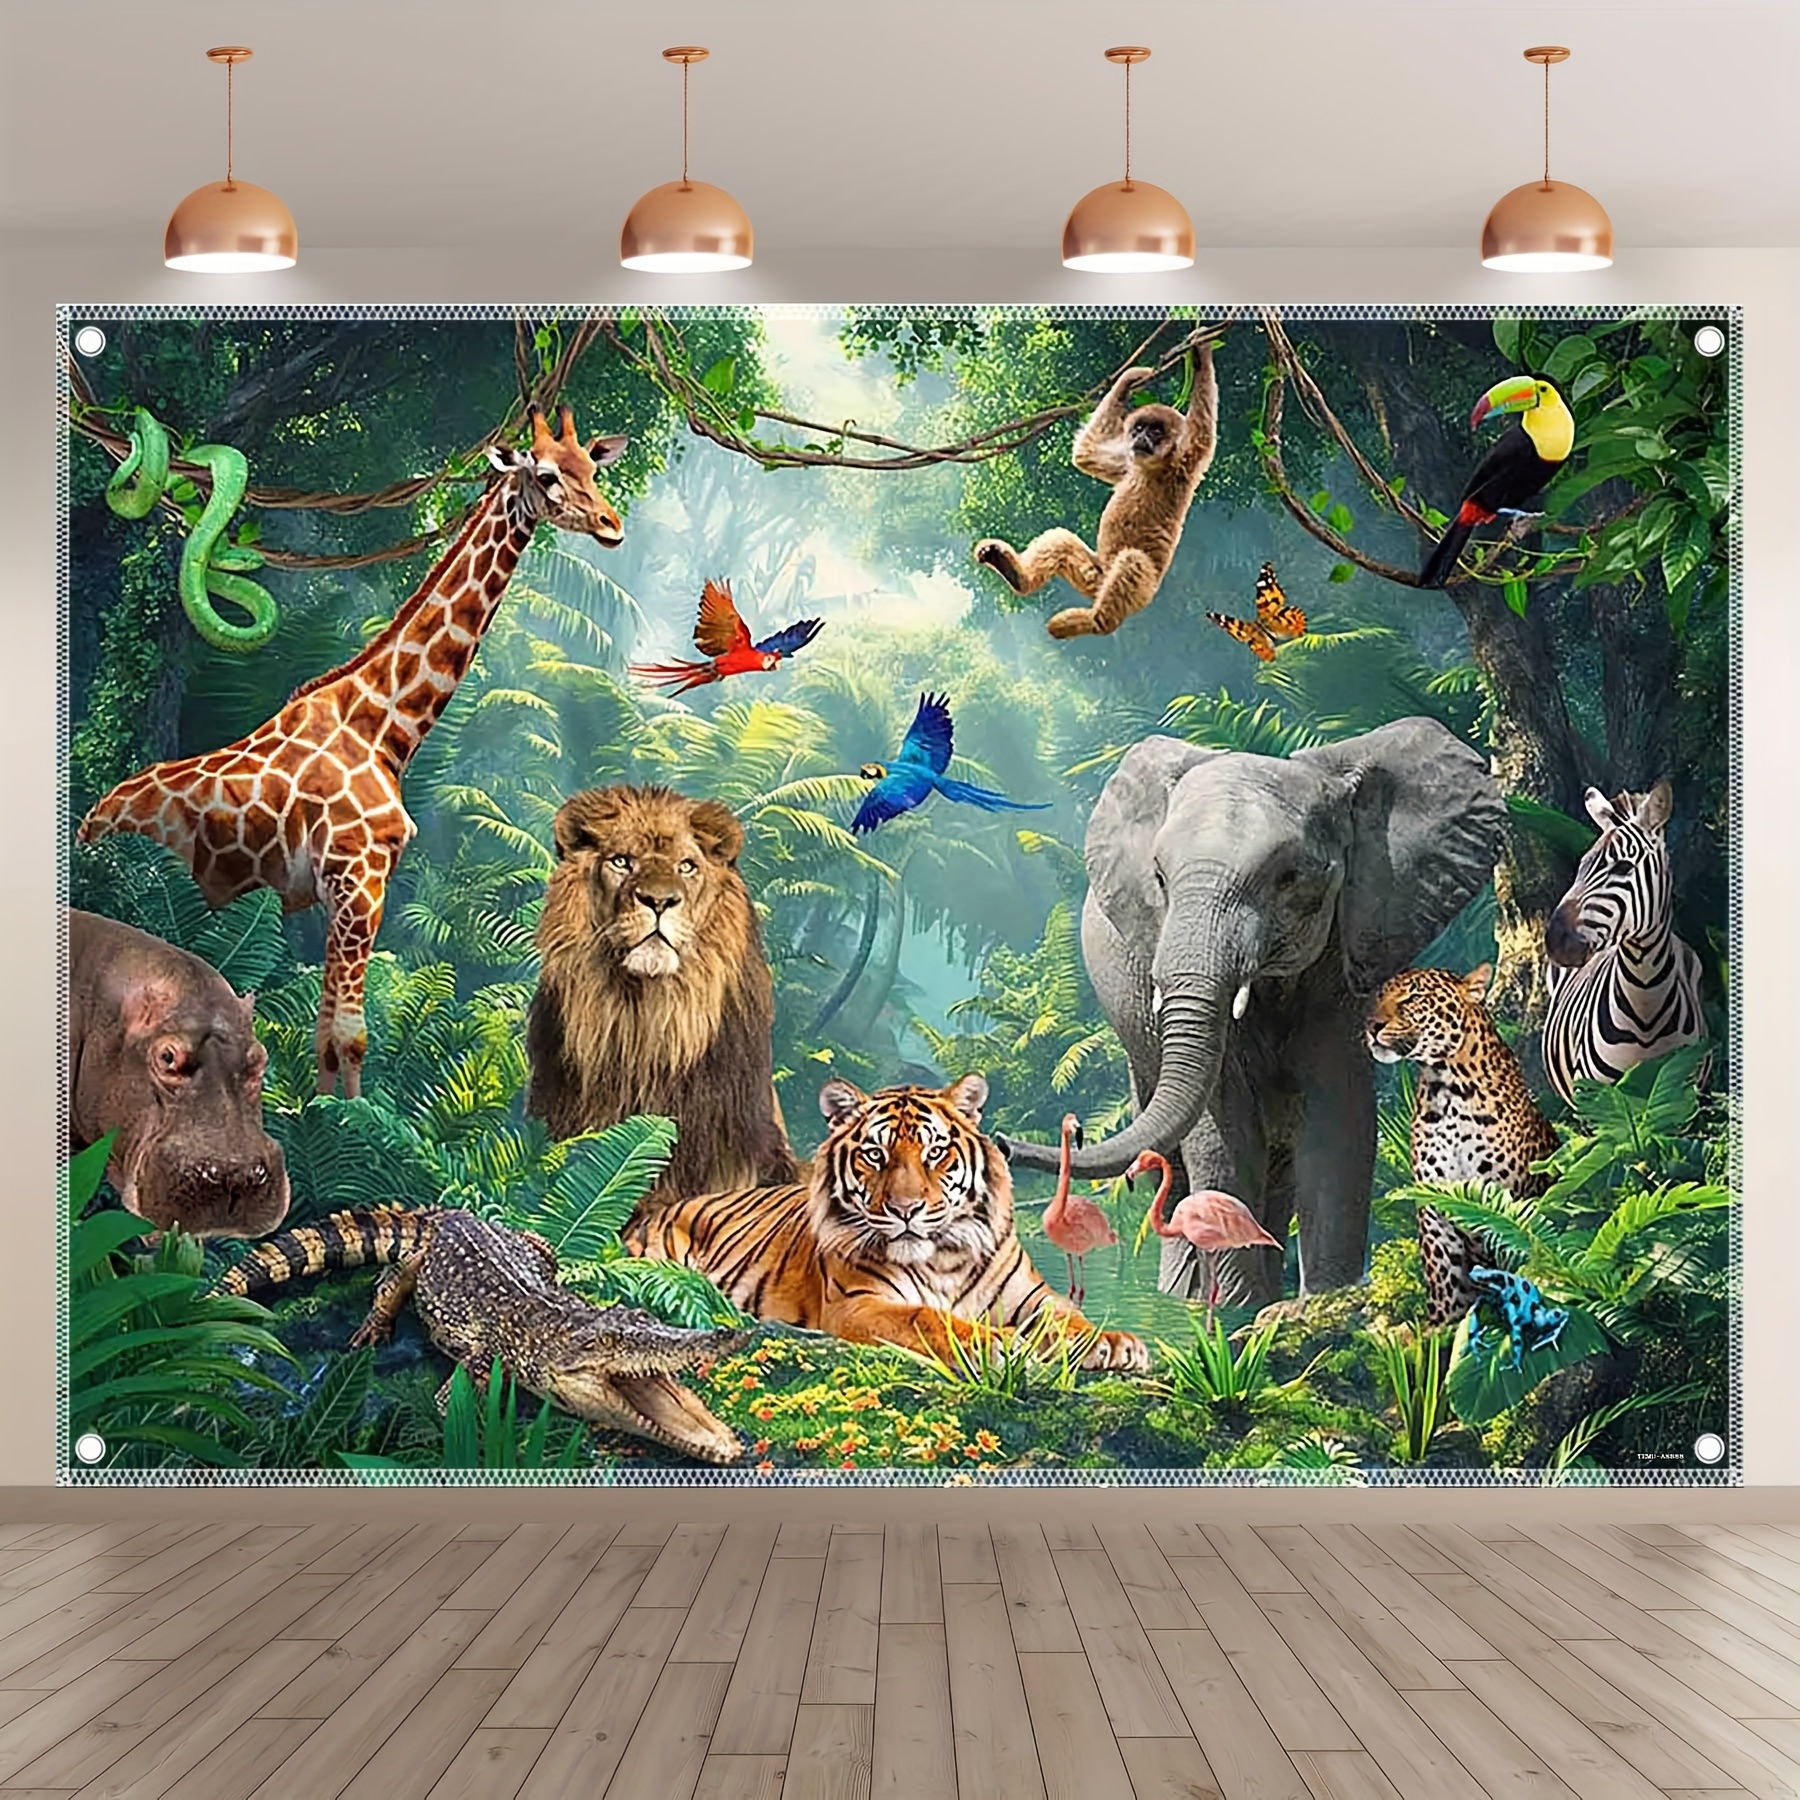 

Vibrant 80g Polyester Jungle Adventure Backdrop: Featuring Tigers, , Elephants, Giraffes, And Zebras - Perfect For Photography And Parties